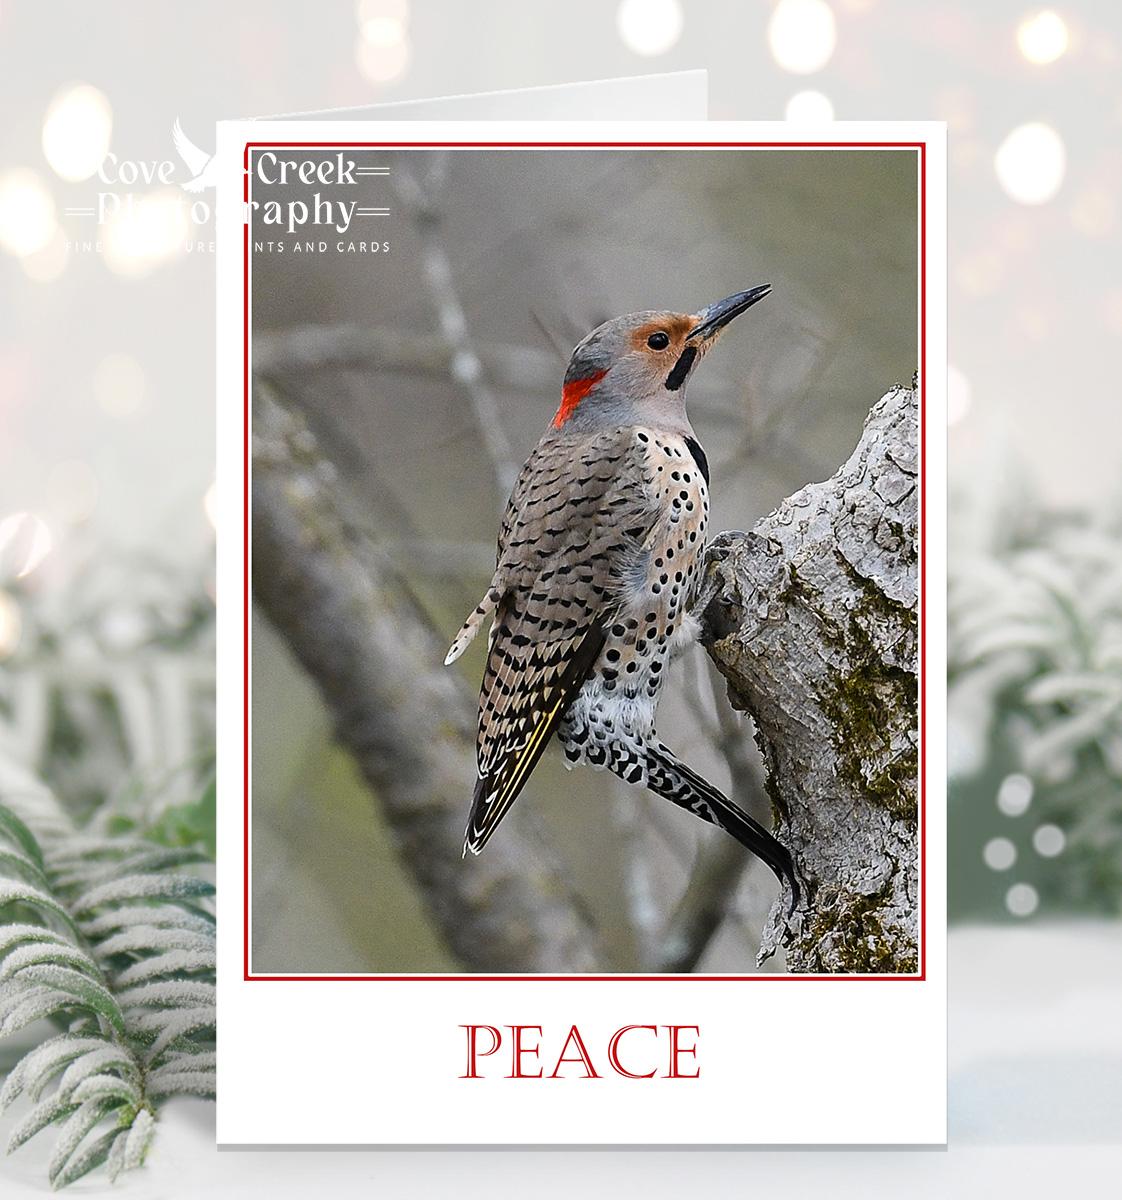 Amale northern flicker is on the front of this nature photography Christmas card with a message of "Peace" and is available at Cove Creek Photography.